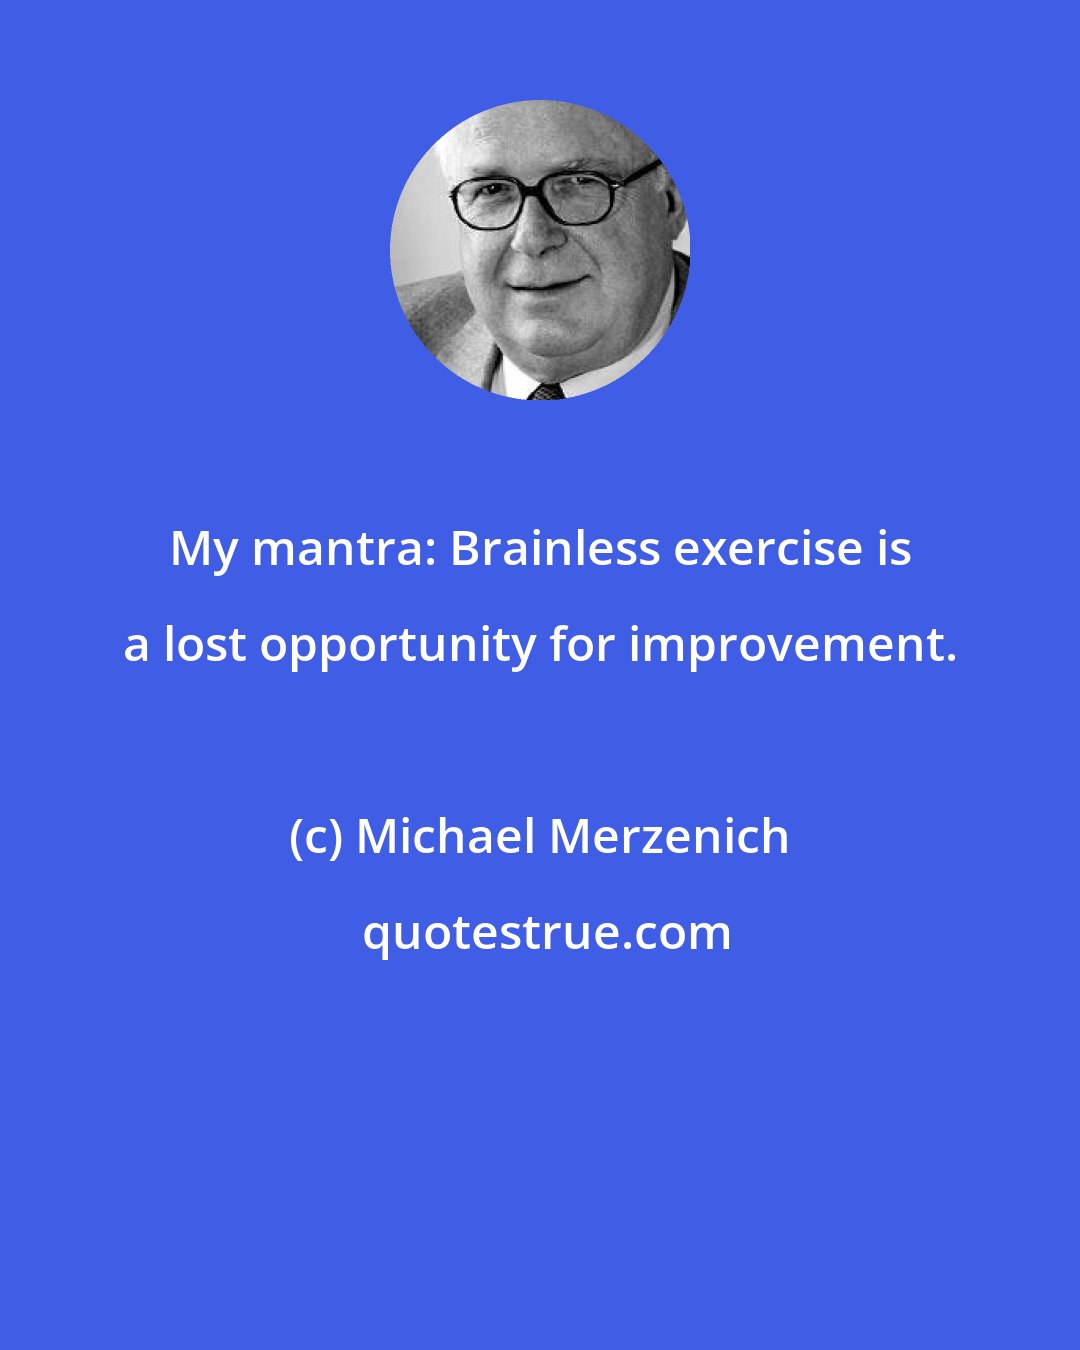 Michael Merzenich: My mantra: Brainless exercise is a lost opportunity for improvement.